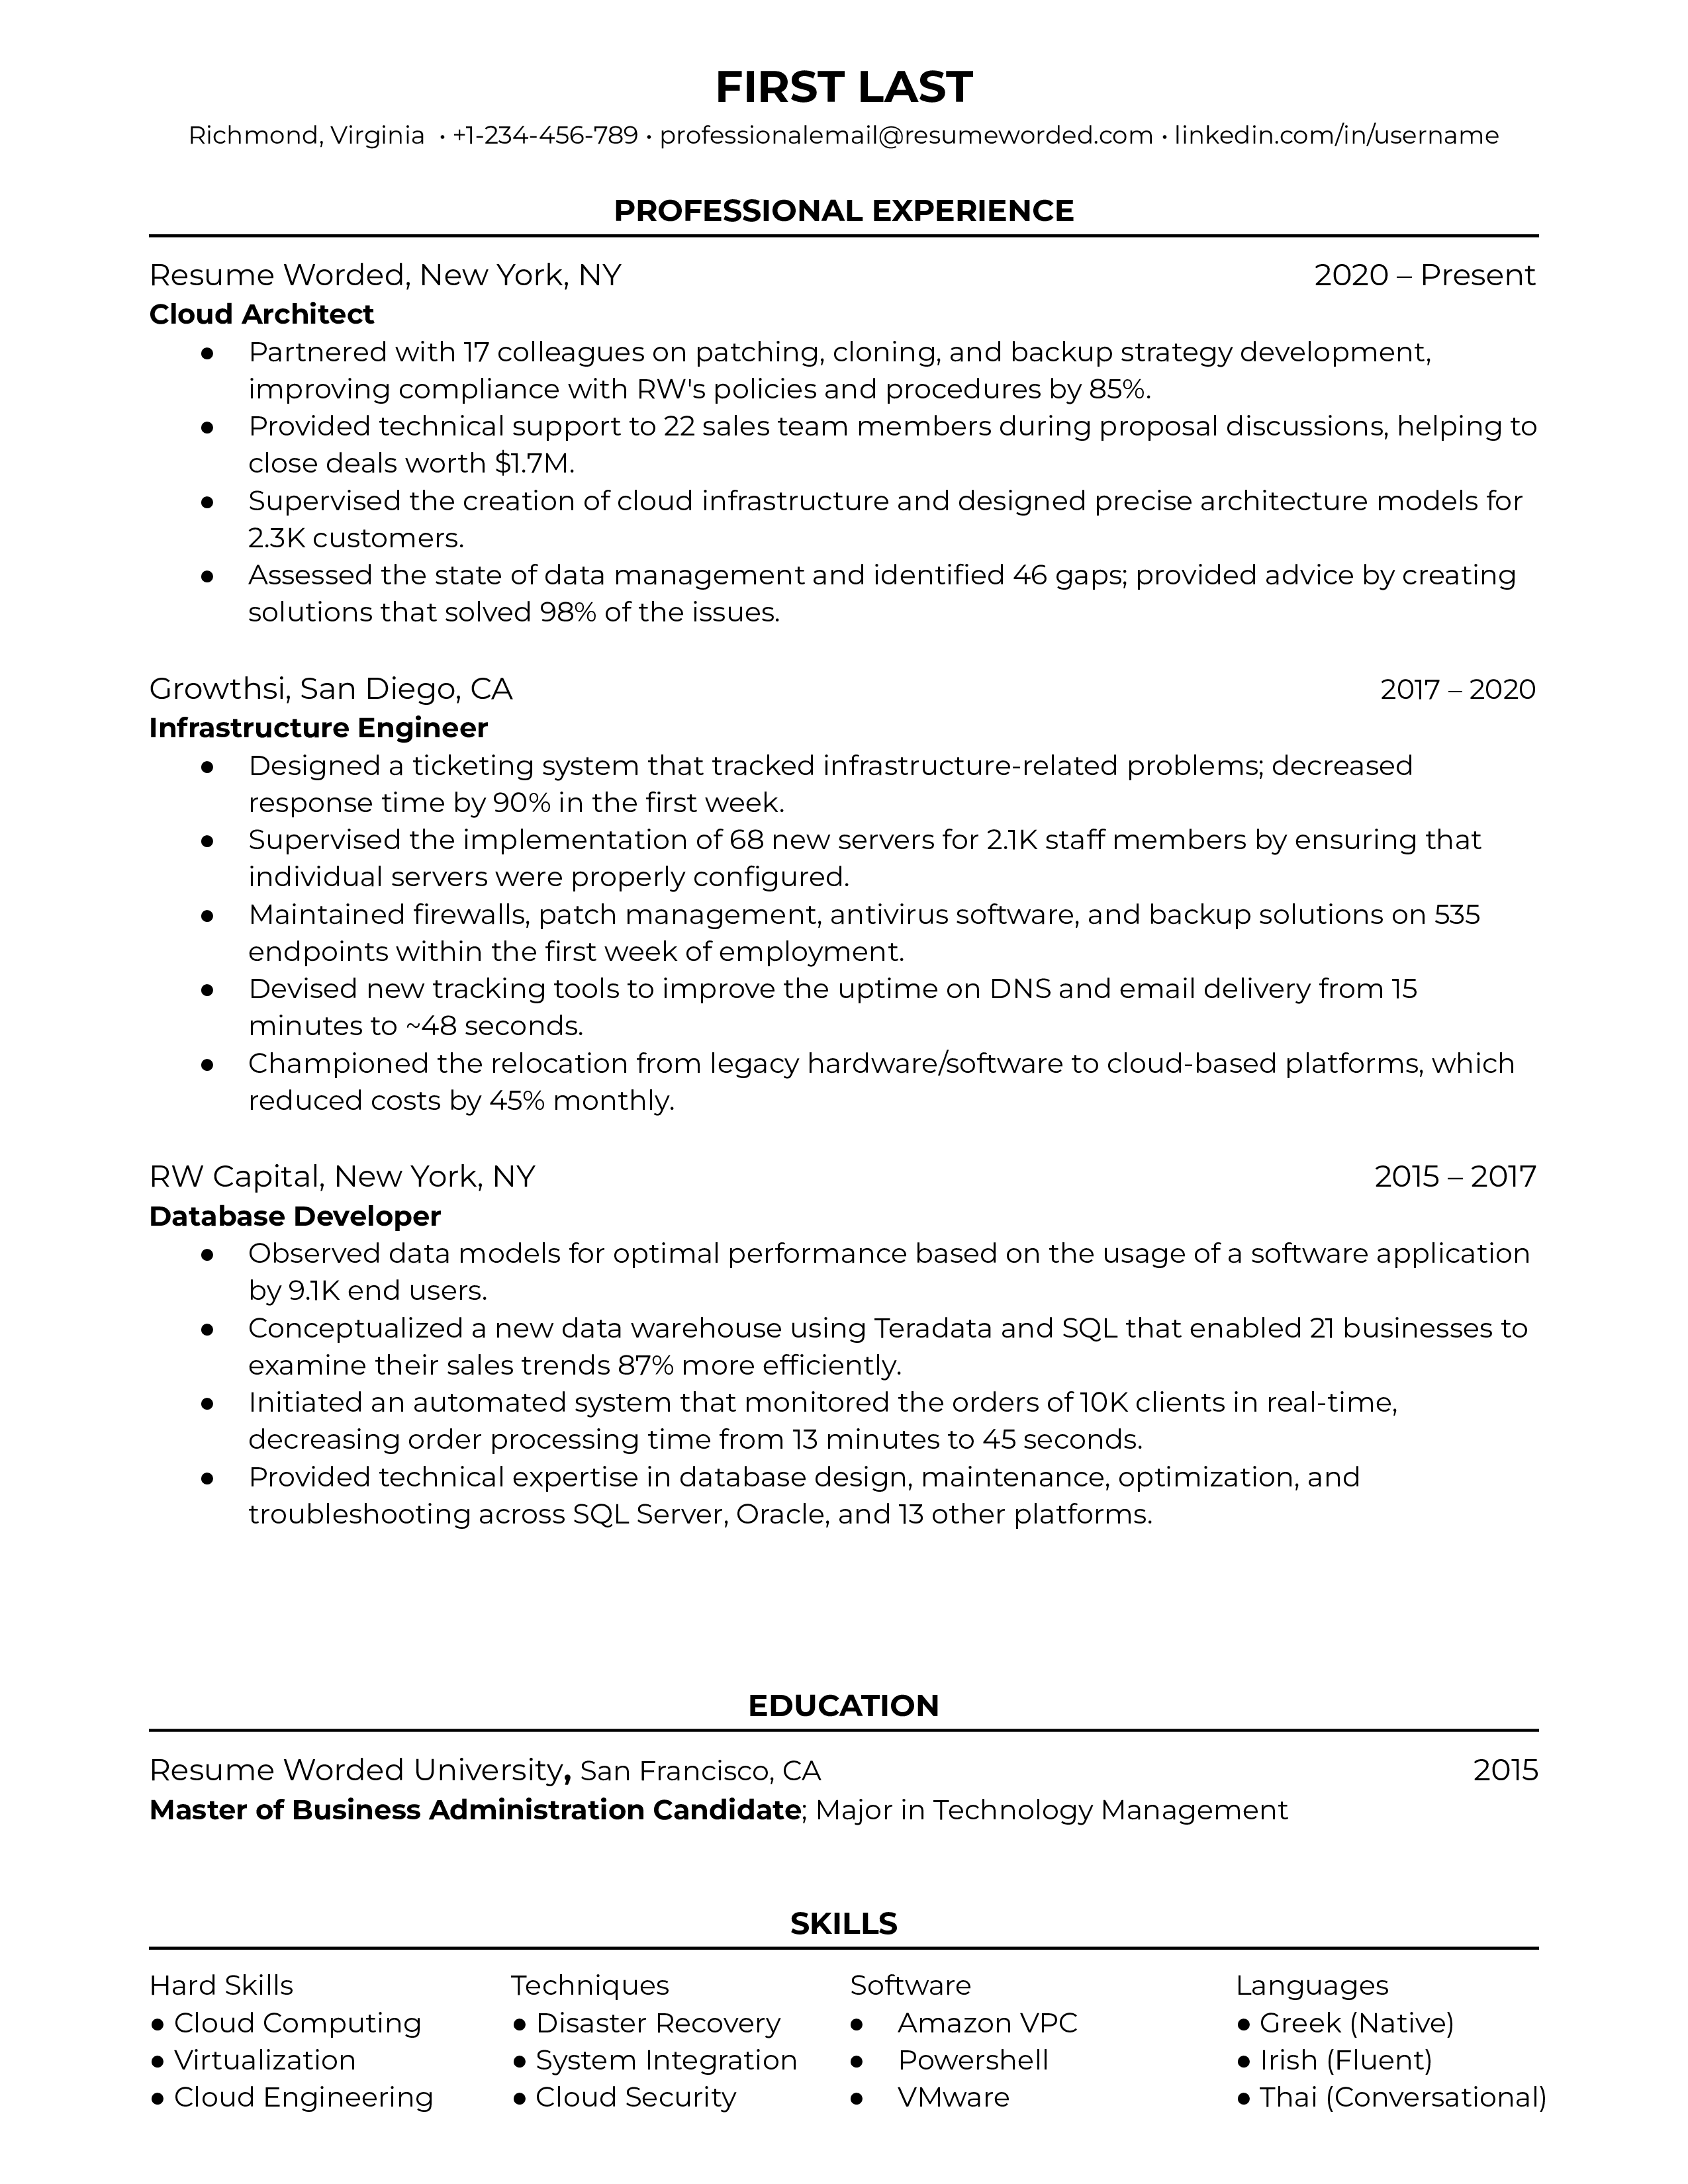 A cloud architect resume template that prioritizes work experience